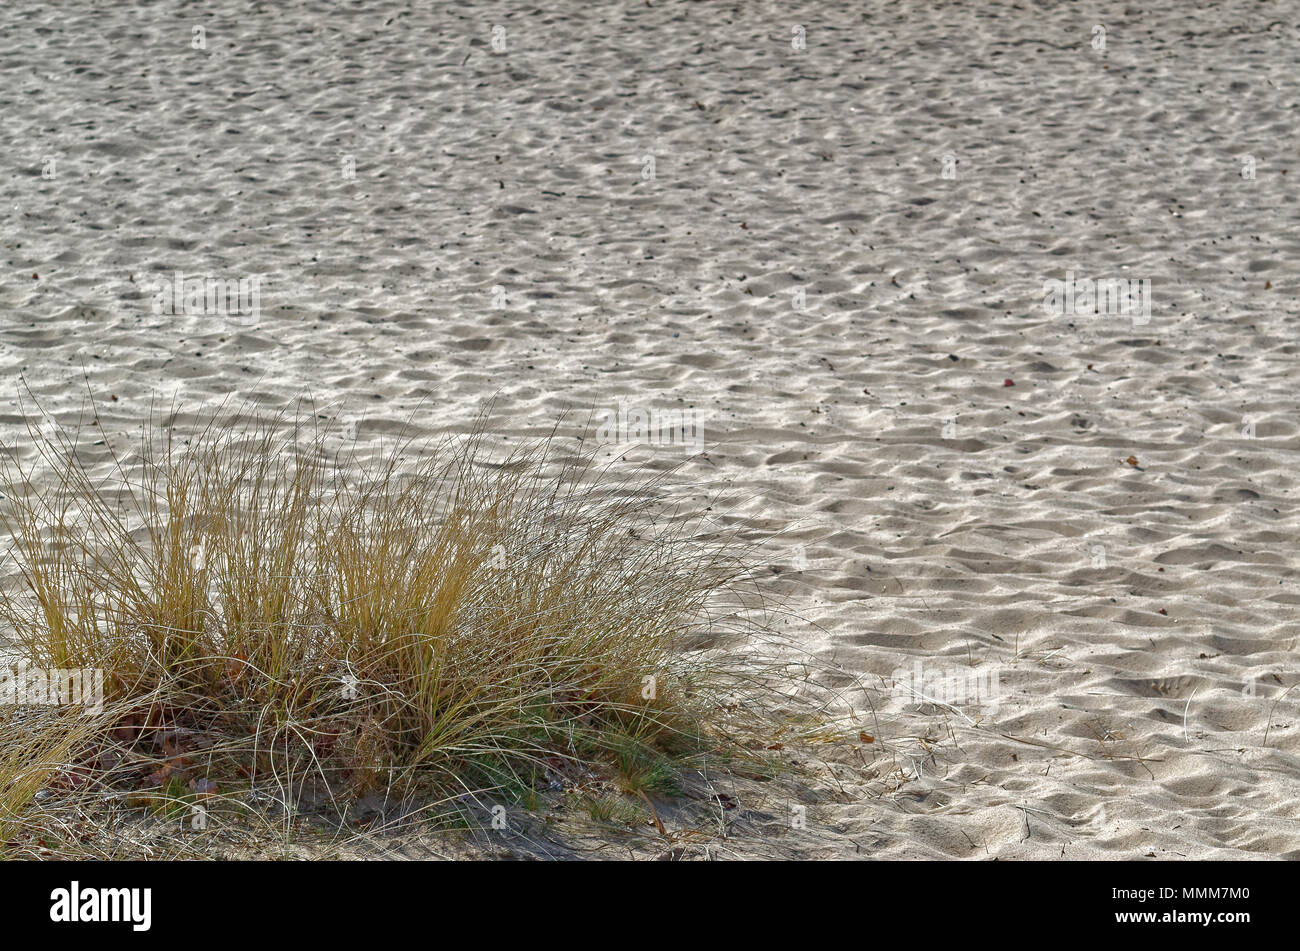 Dry grass in a sandy ground, Nature reserve Boberger Niederung in Hamburg, Germany Stock Photo